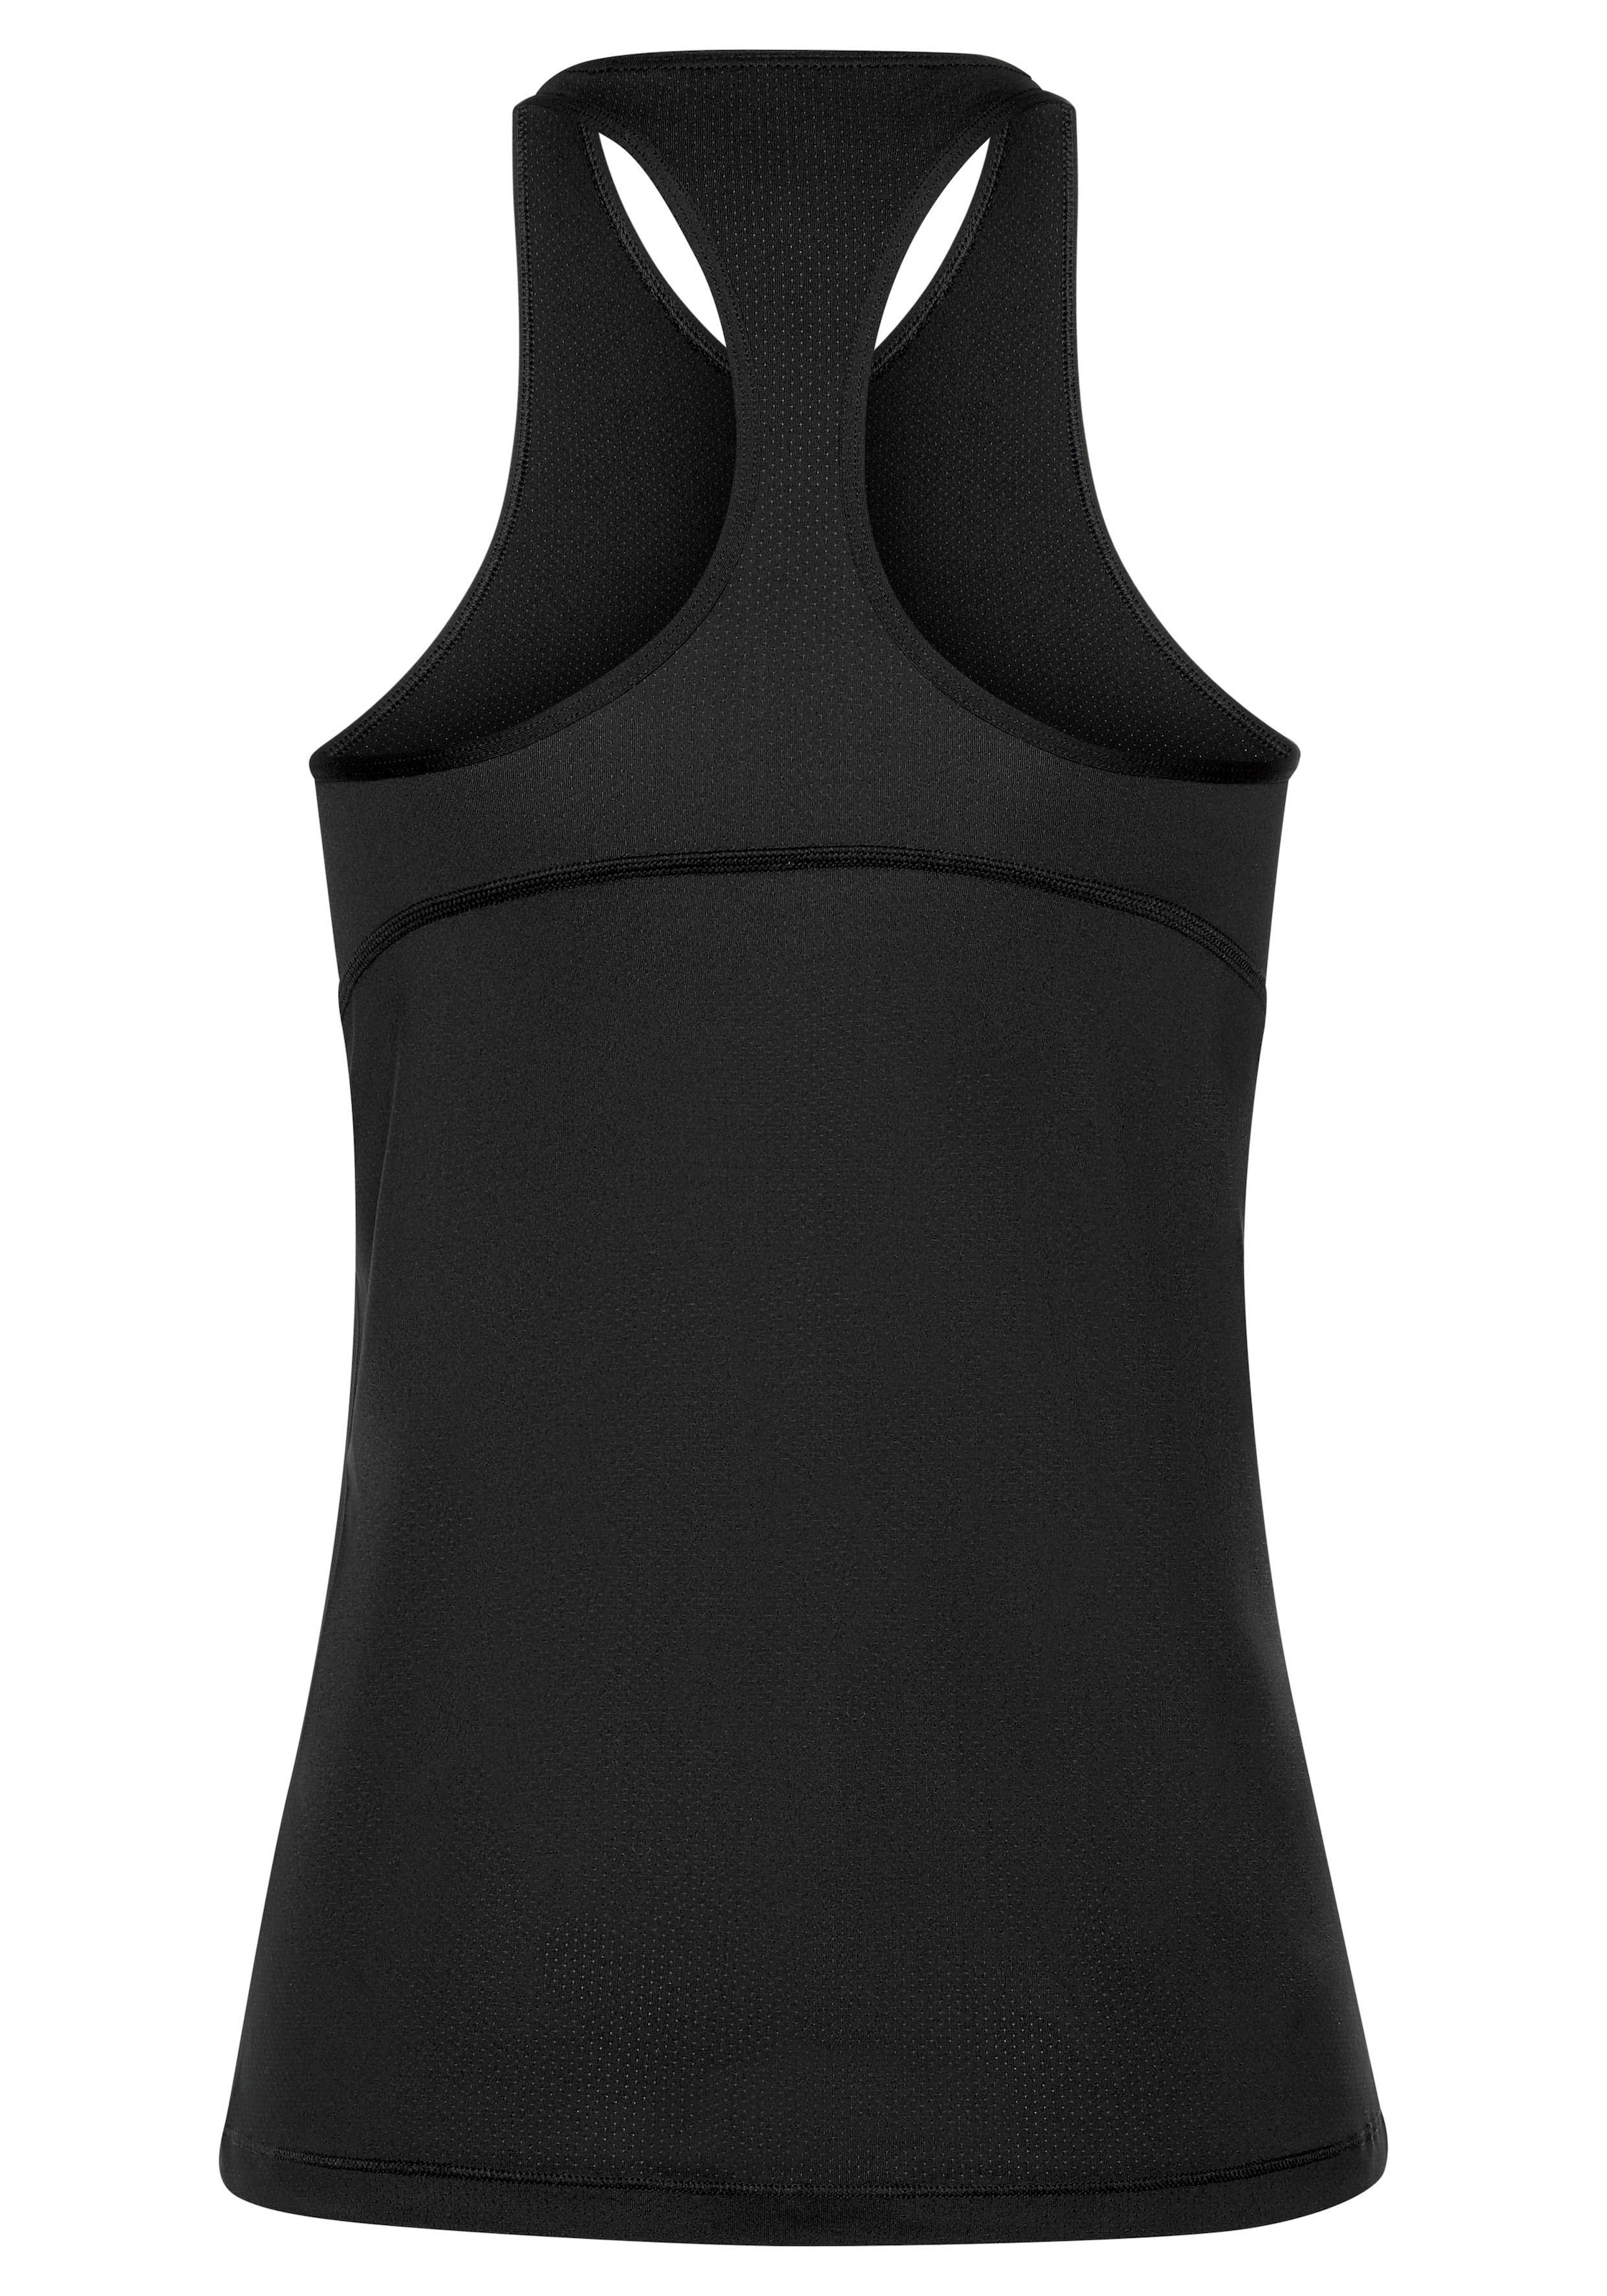 OVER NP MESH« Funktionstop TANK online »WOMAN ALL Nike